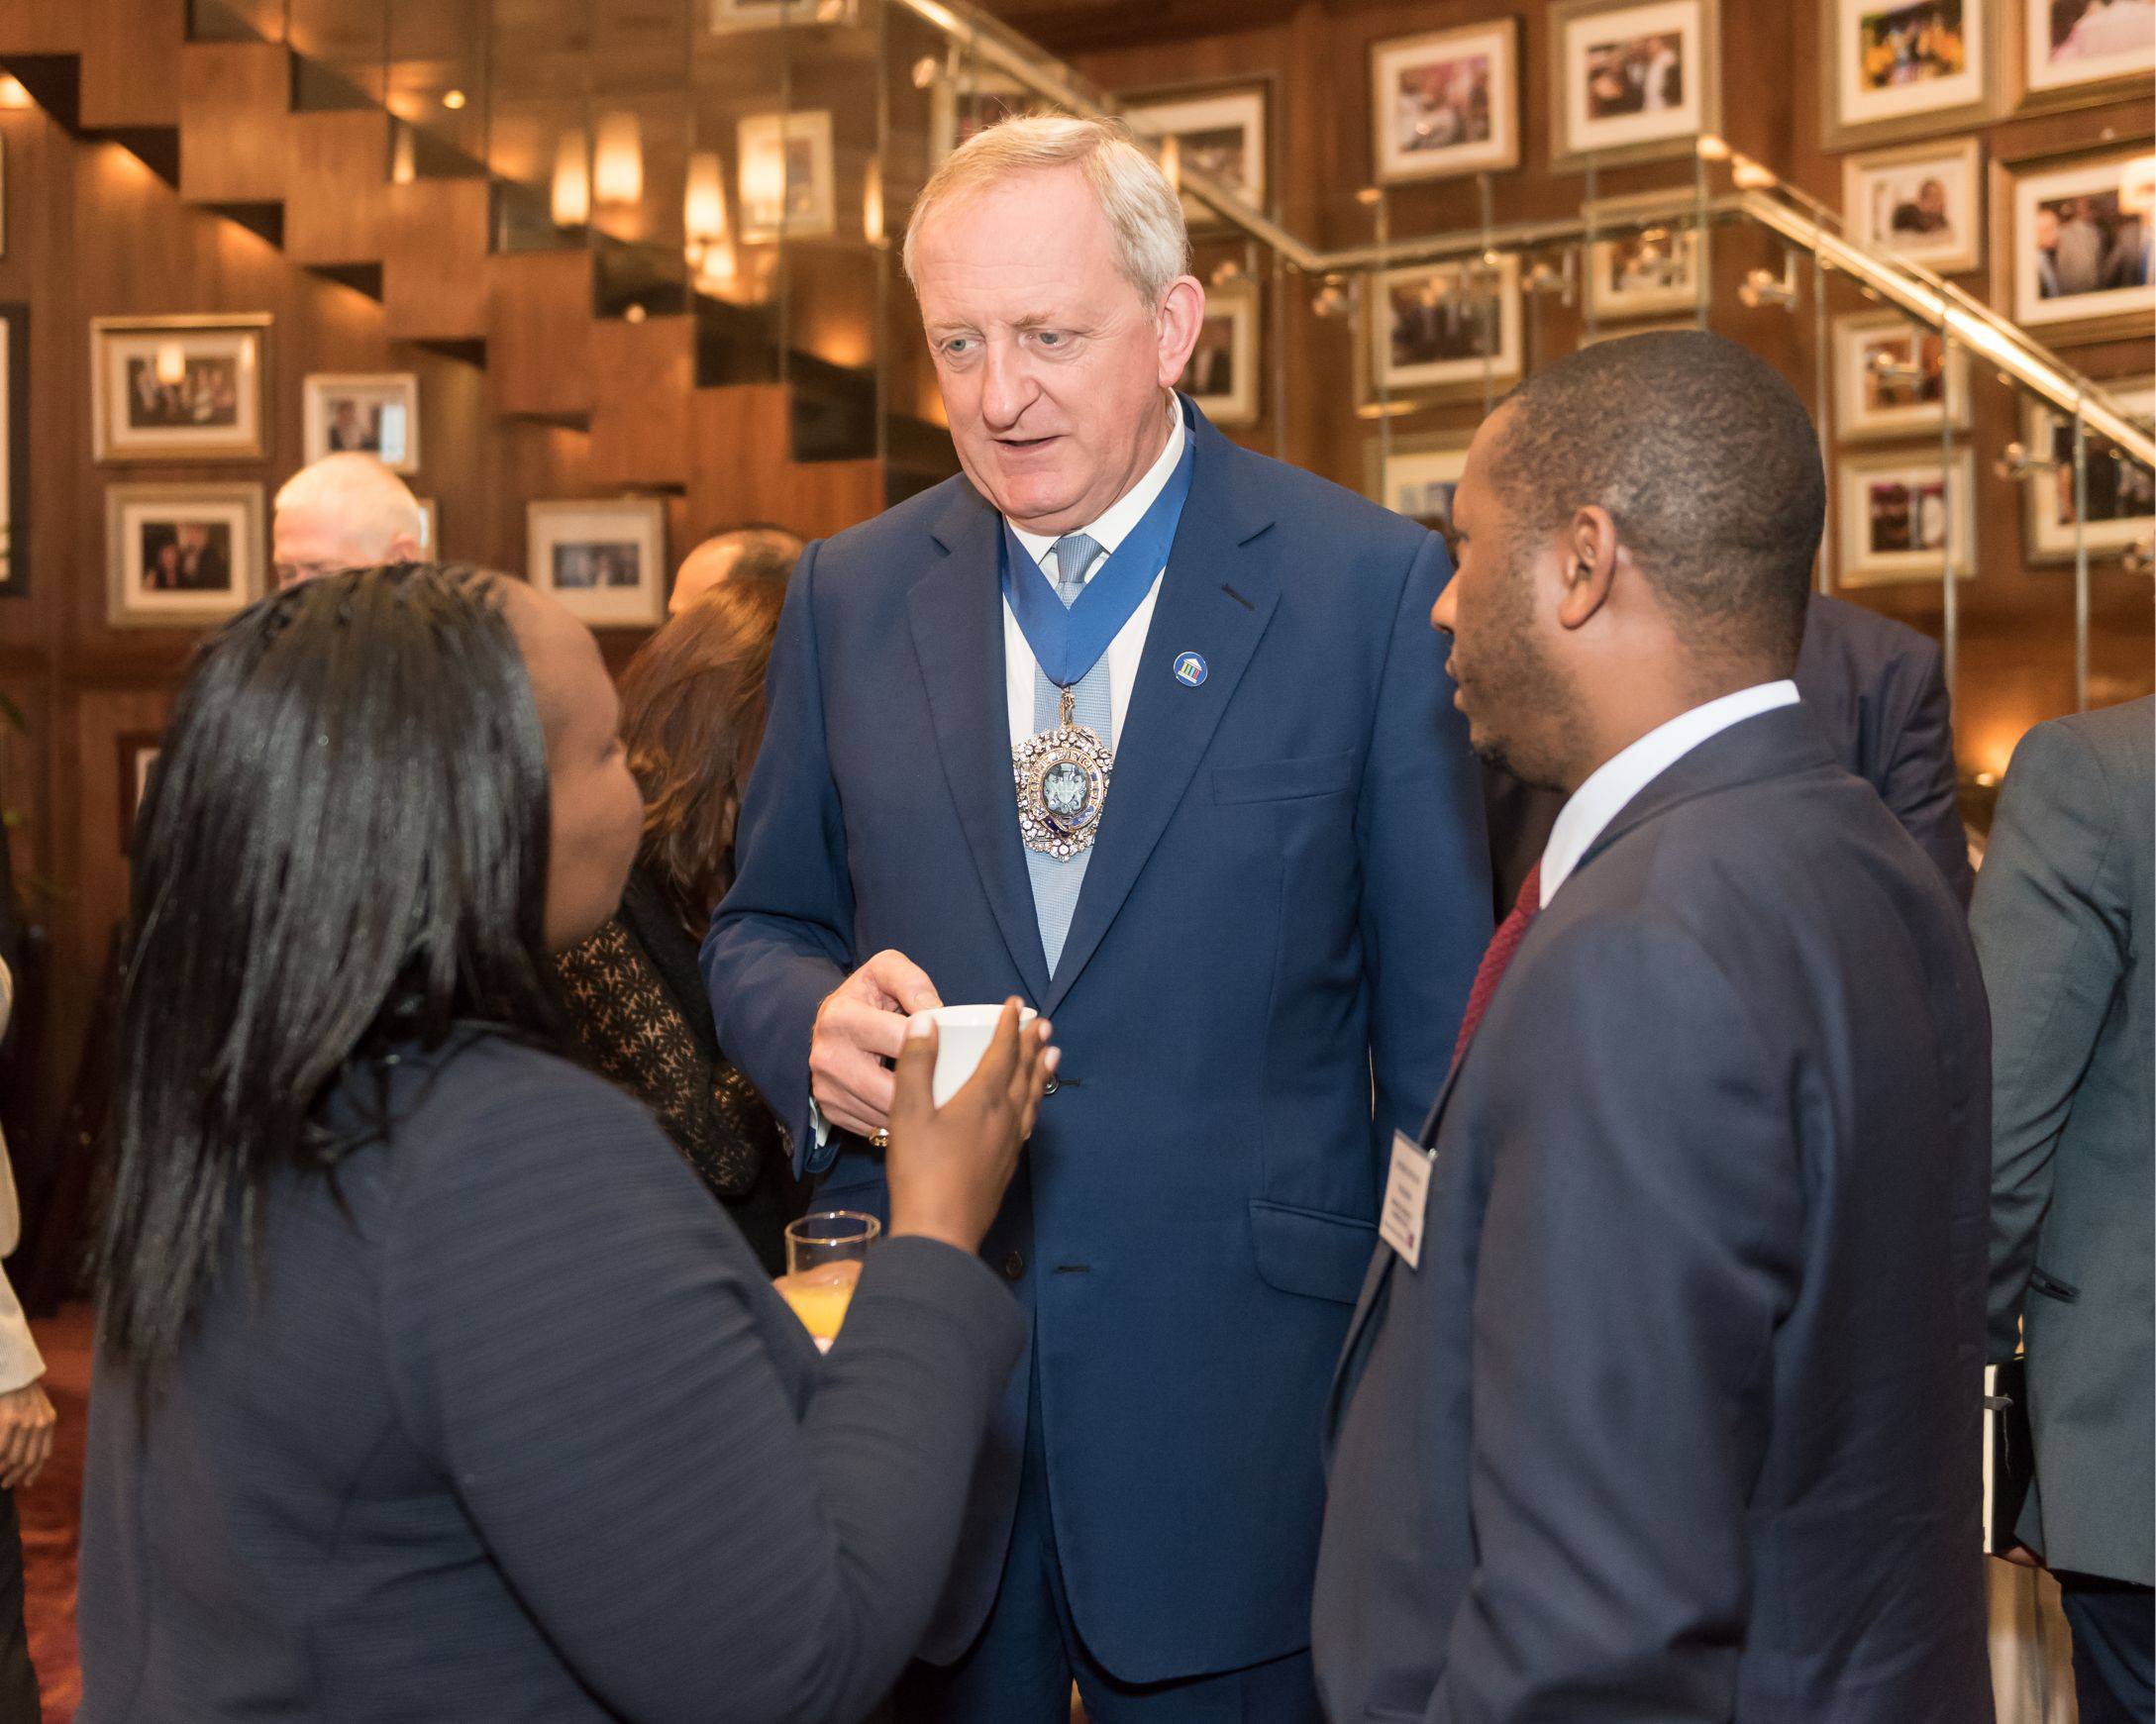 Breakfast with the Lord Mayor of the City of London 74